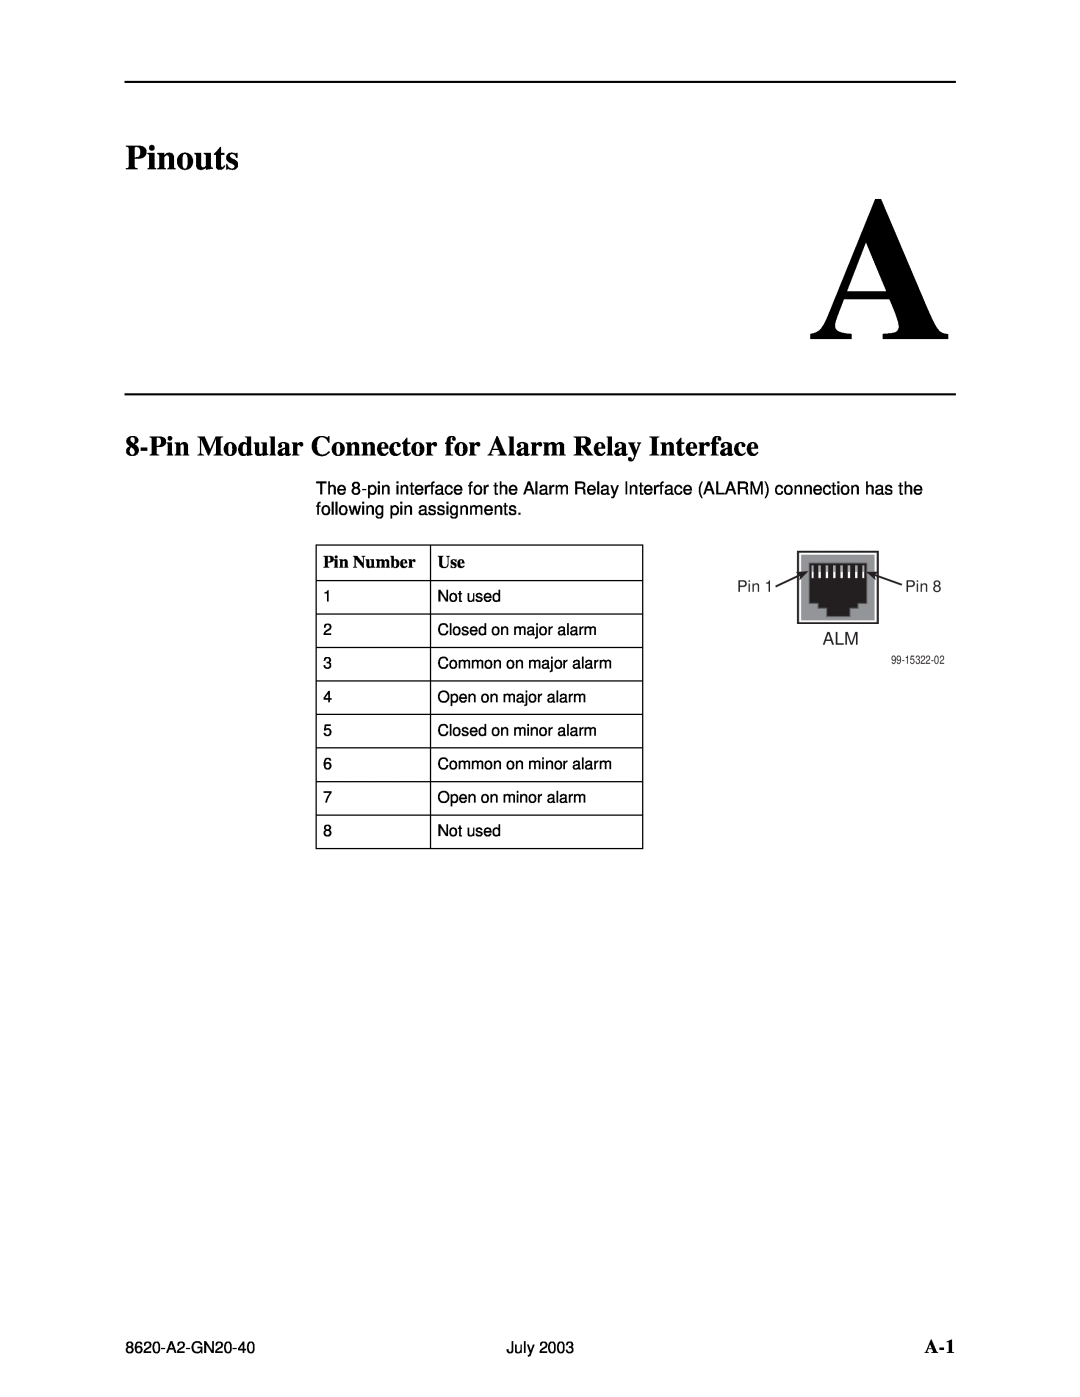 Paradyne Hotwire 8620 GranDSLAM Installation Guide manual Pinouts, Pin Modular Connector for Alarm Relay Interface 